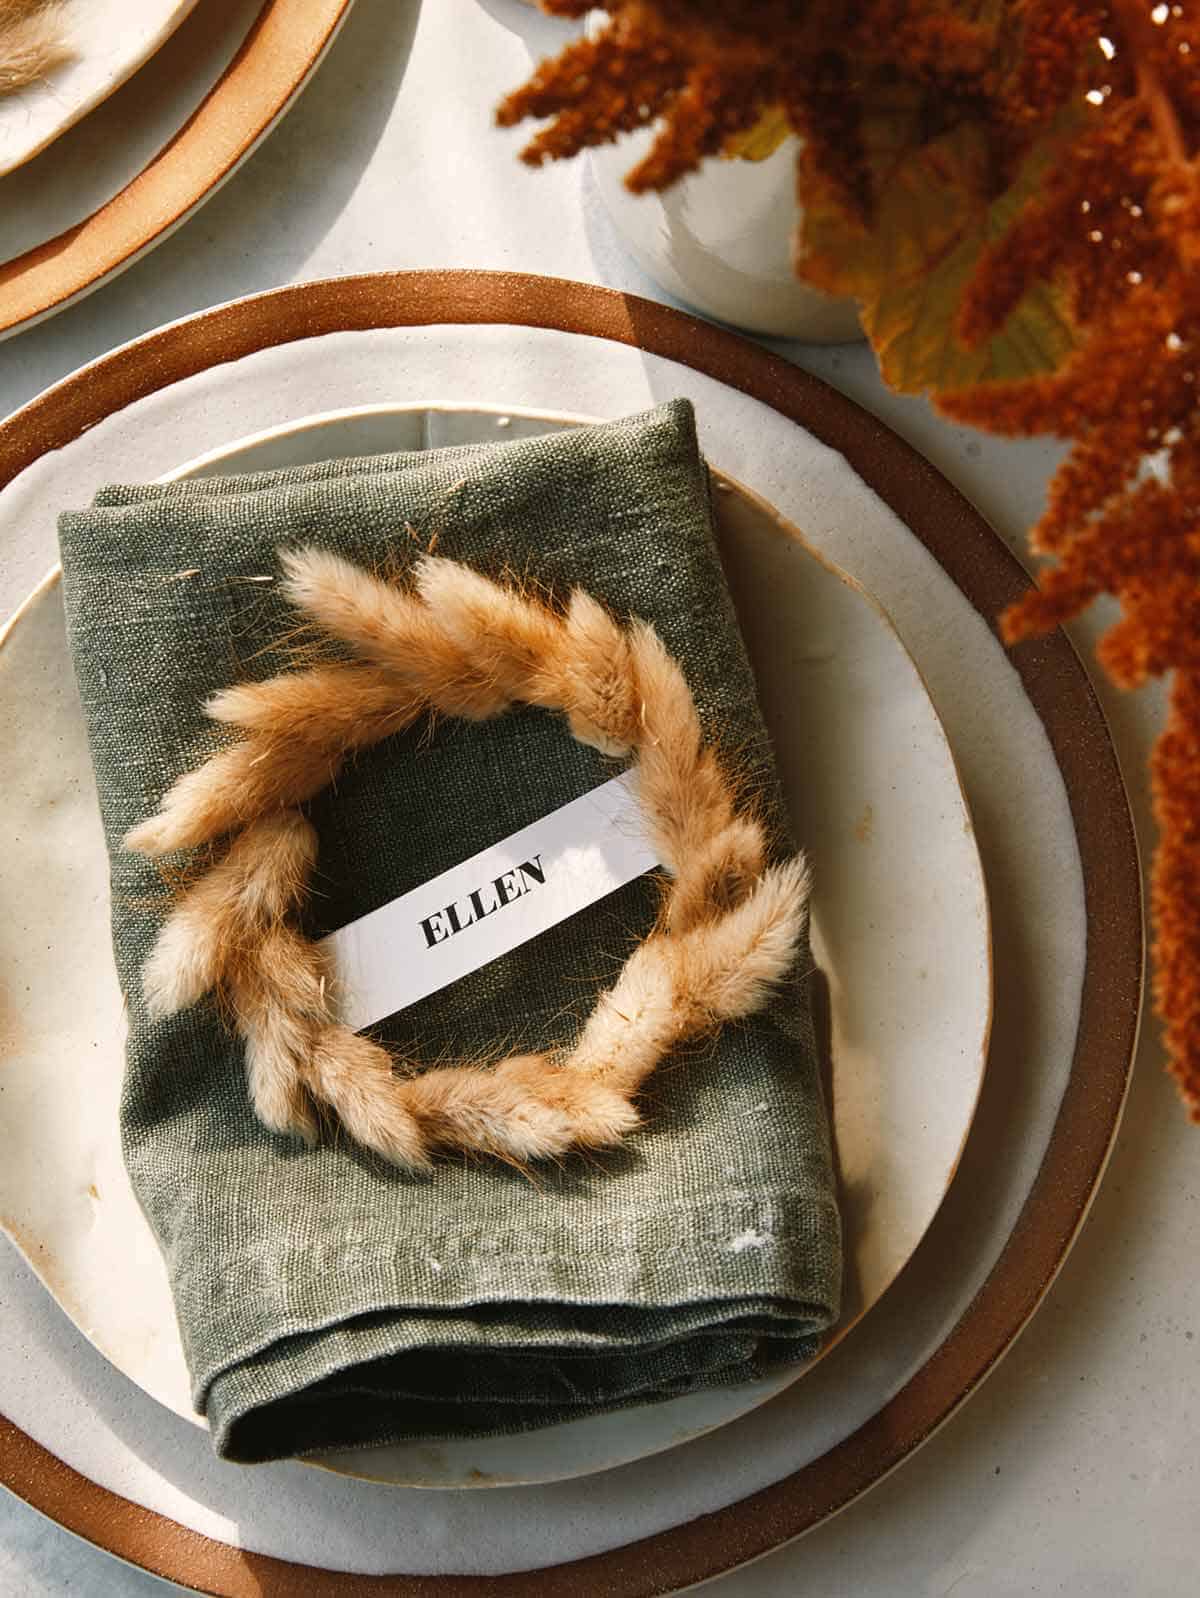 Mini Wreath Place cards DIY on a plate for a special occasion.